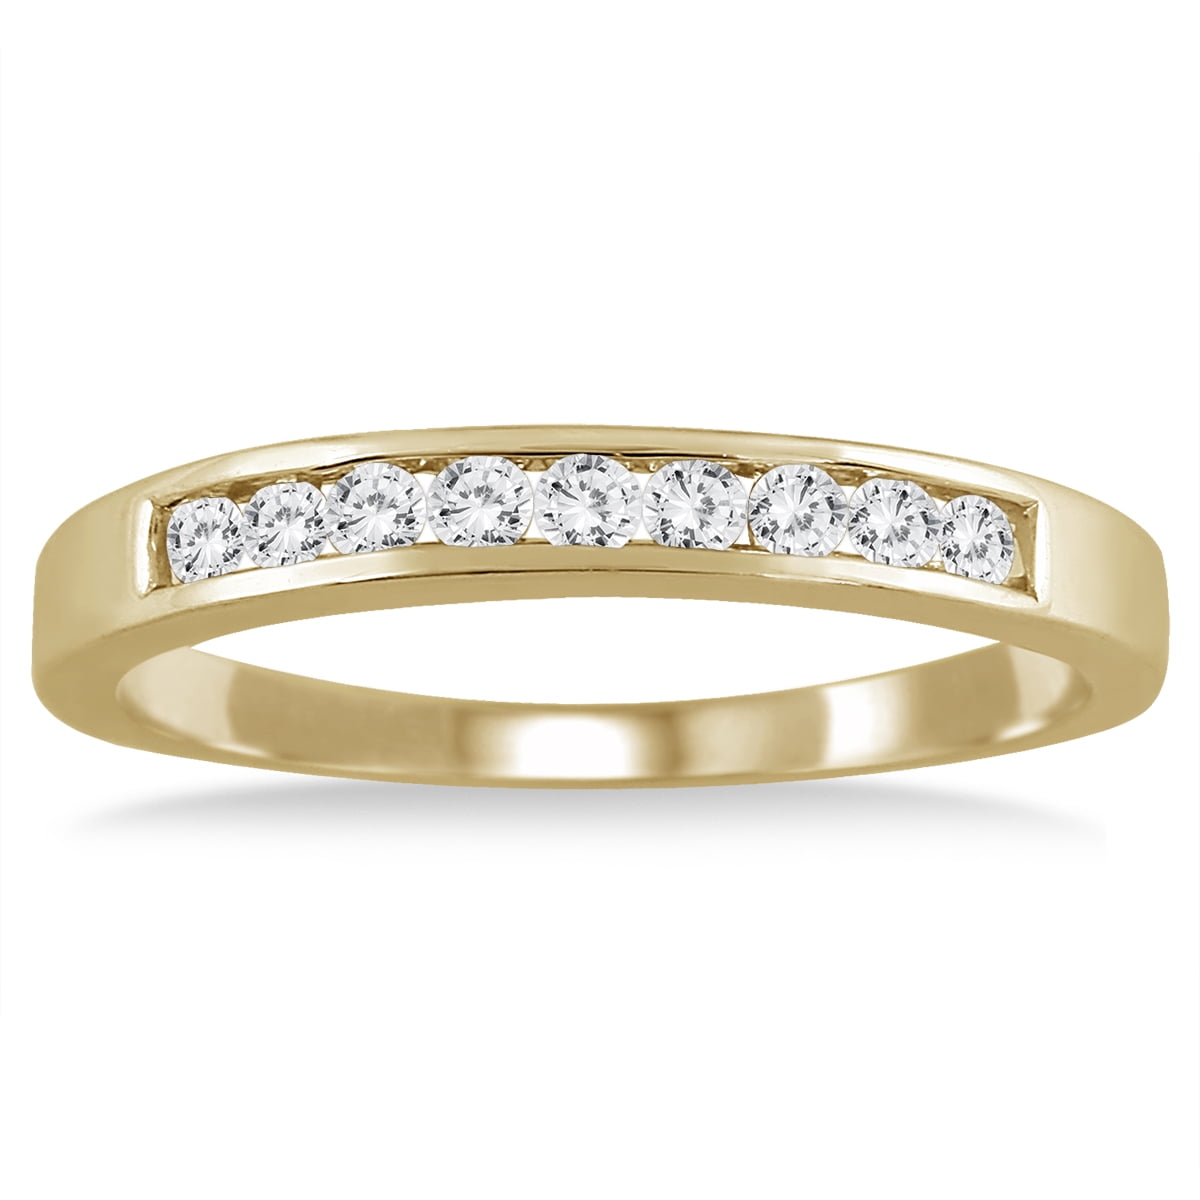 1/2ctw Diamond Channel Wedding Band in 10k Yellow Gold H-I, I2-I3 